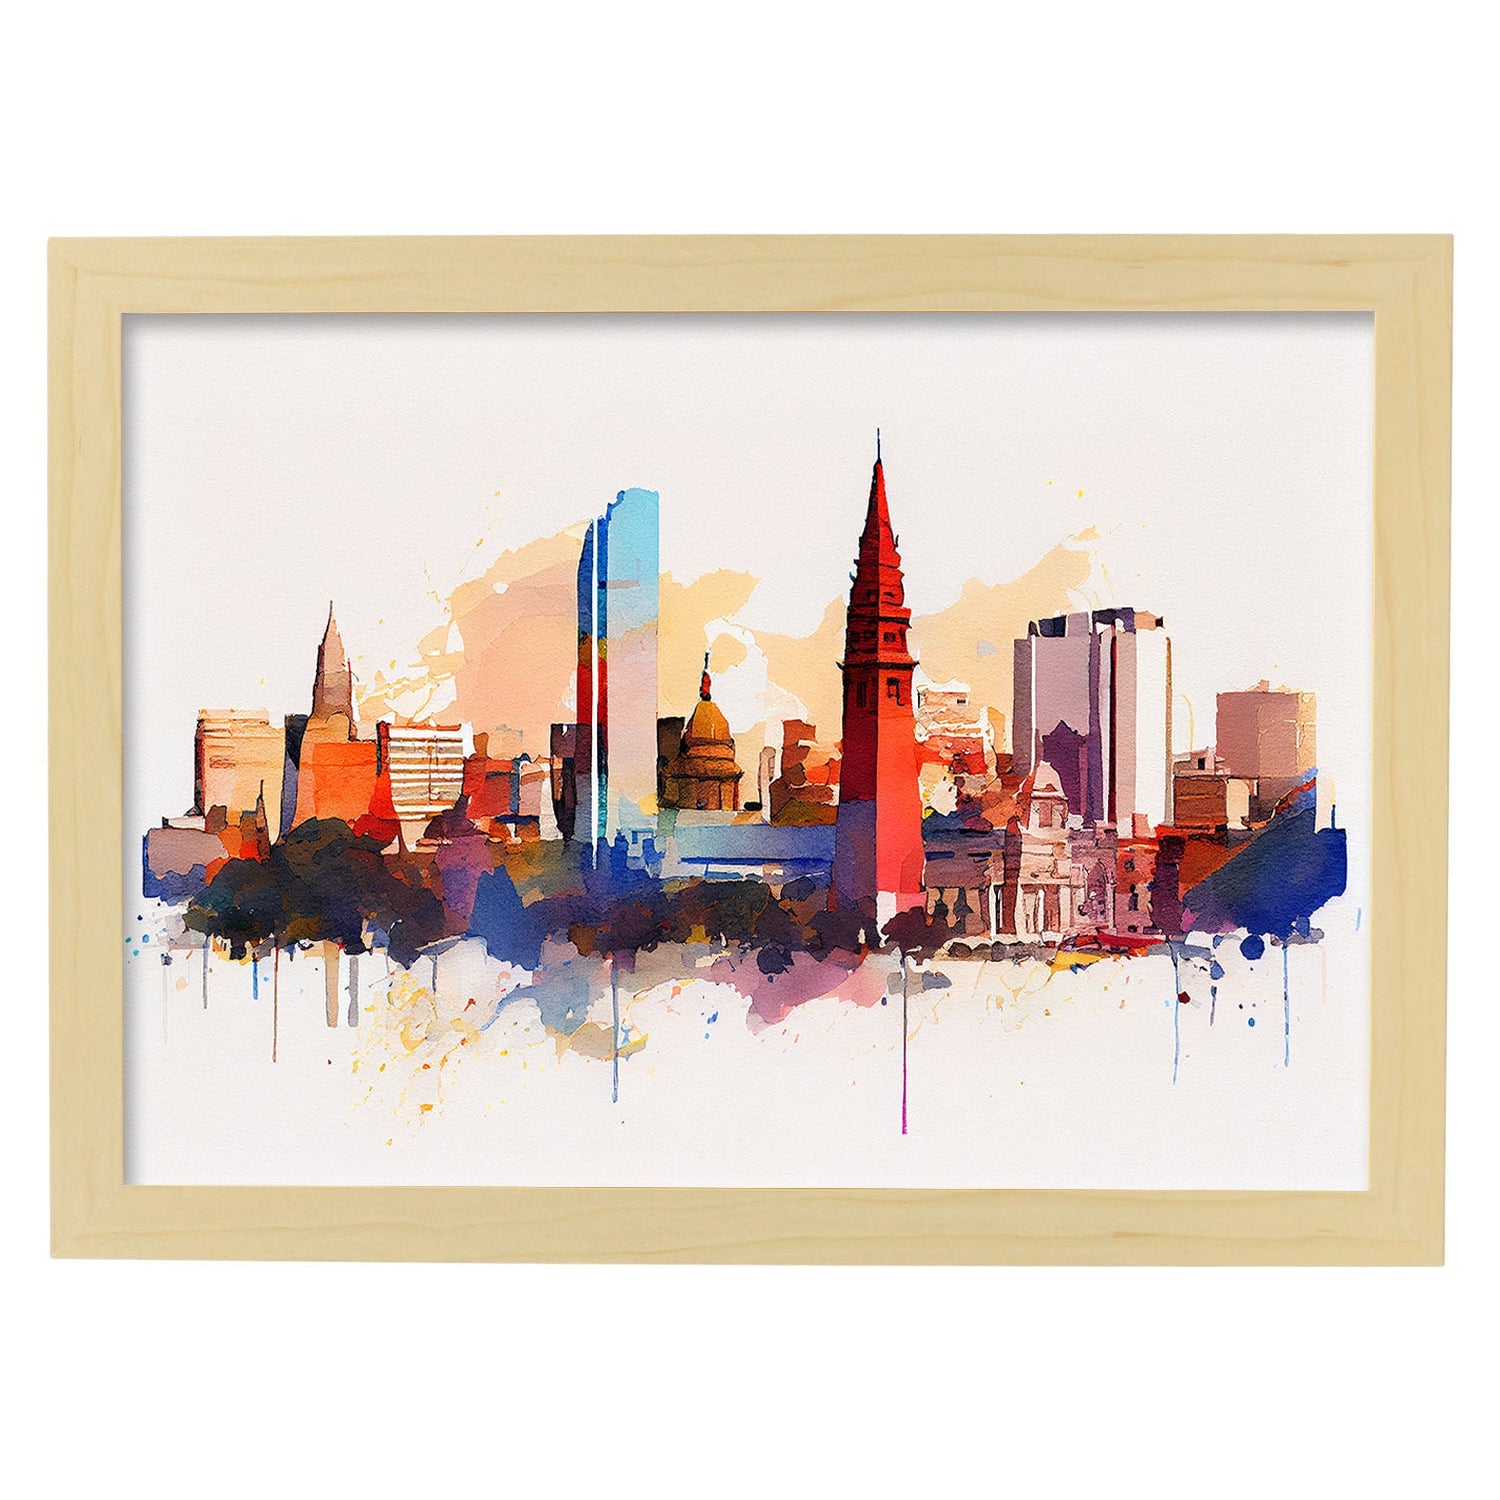 Nacnic watercolor of a skyline of the city of Buenos Aires_4. Aesthetic Wall Art Prints for Bedroom or Living Room Design.-Artwork-Nacnic-A4-Marco Madera Clara-Nacnic Estudio SL